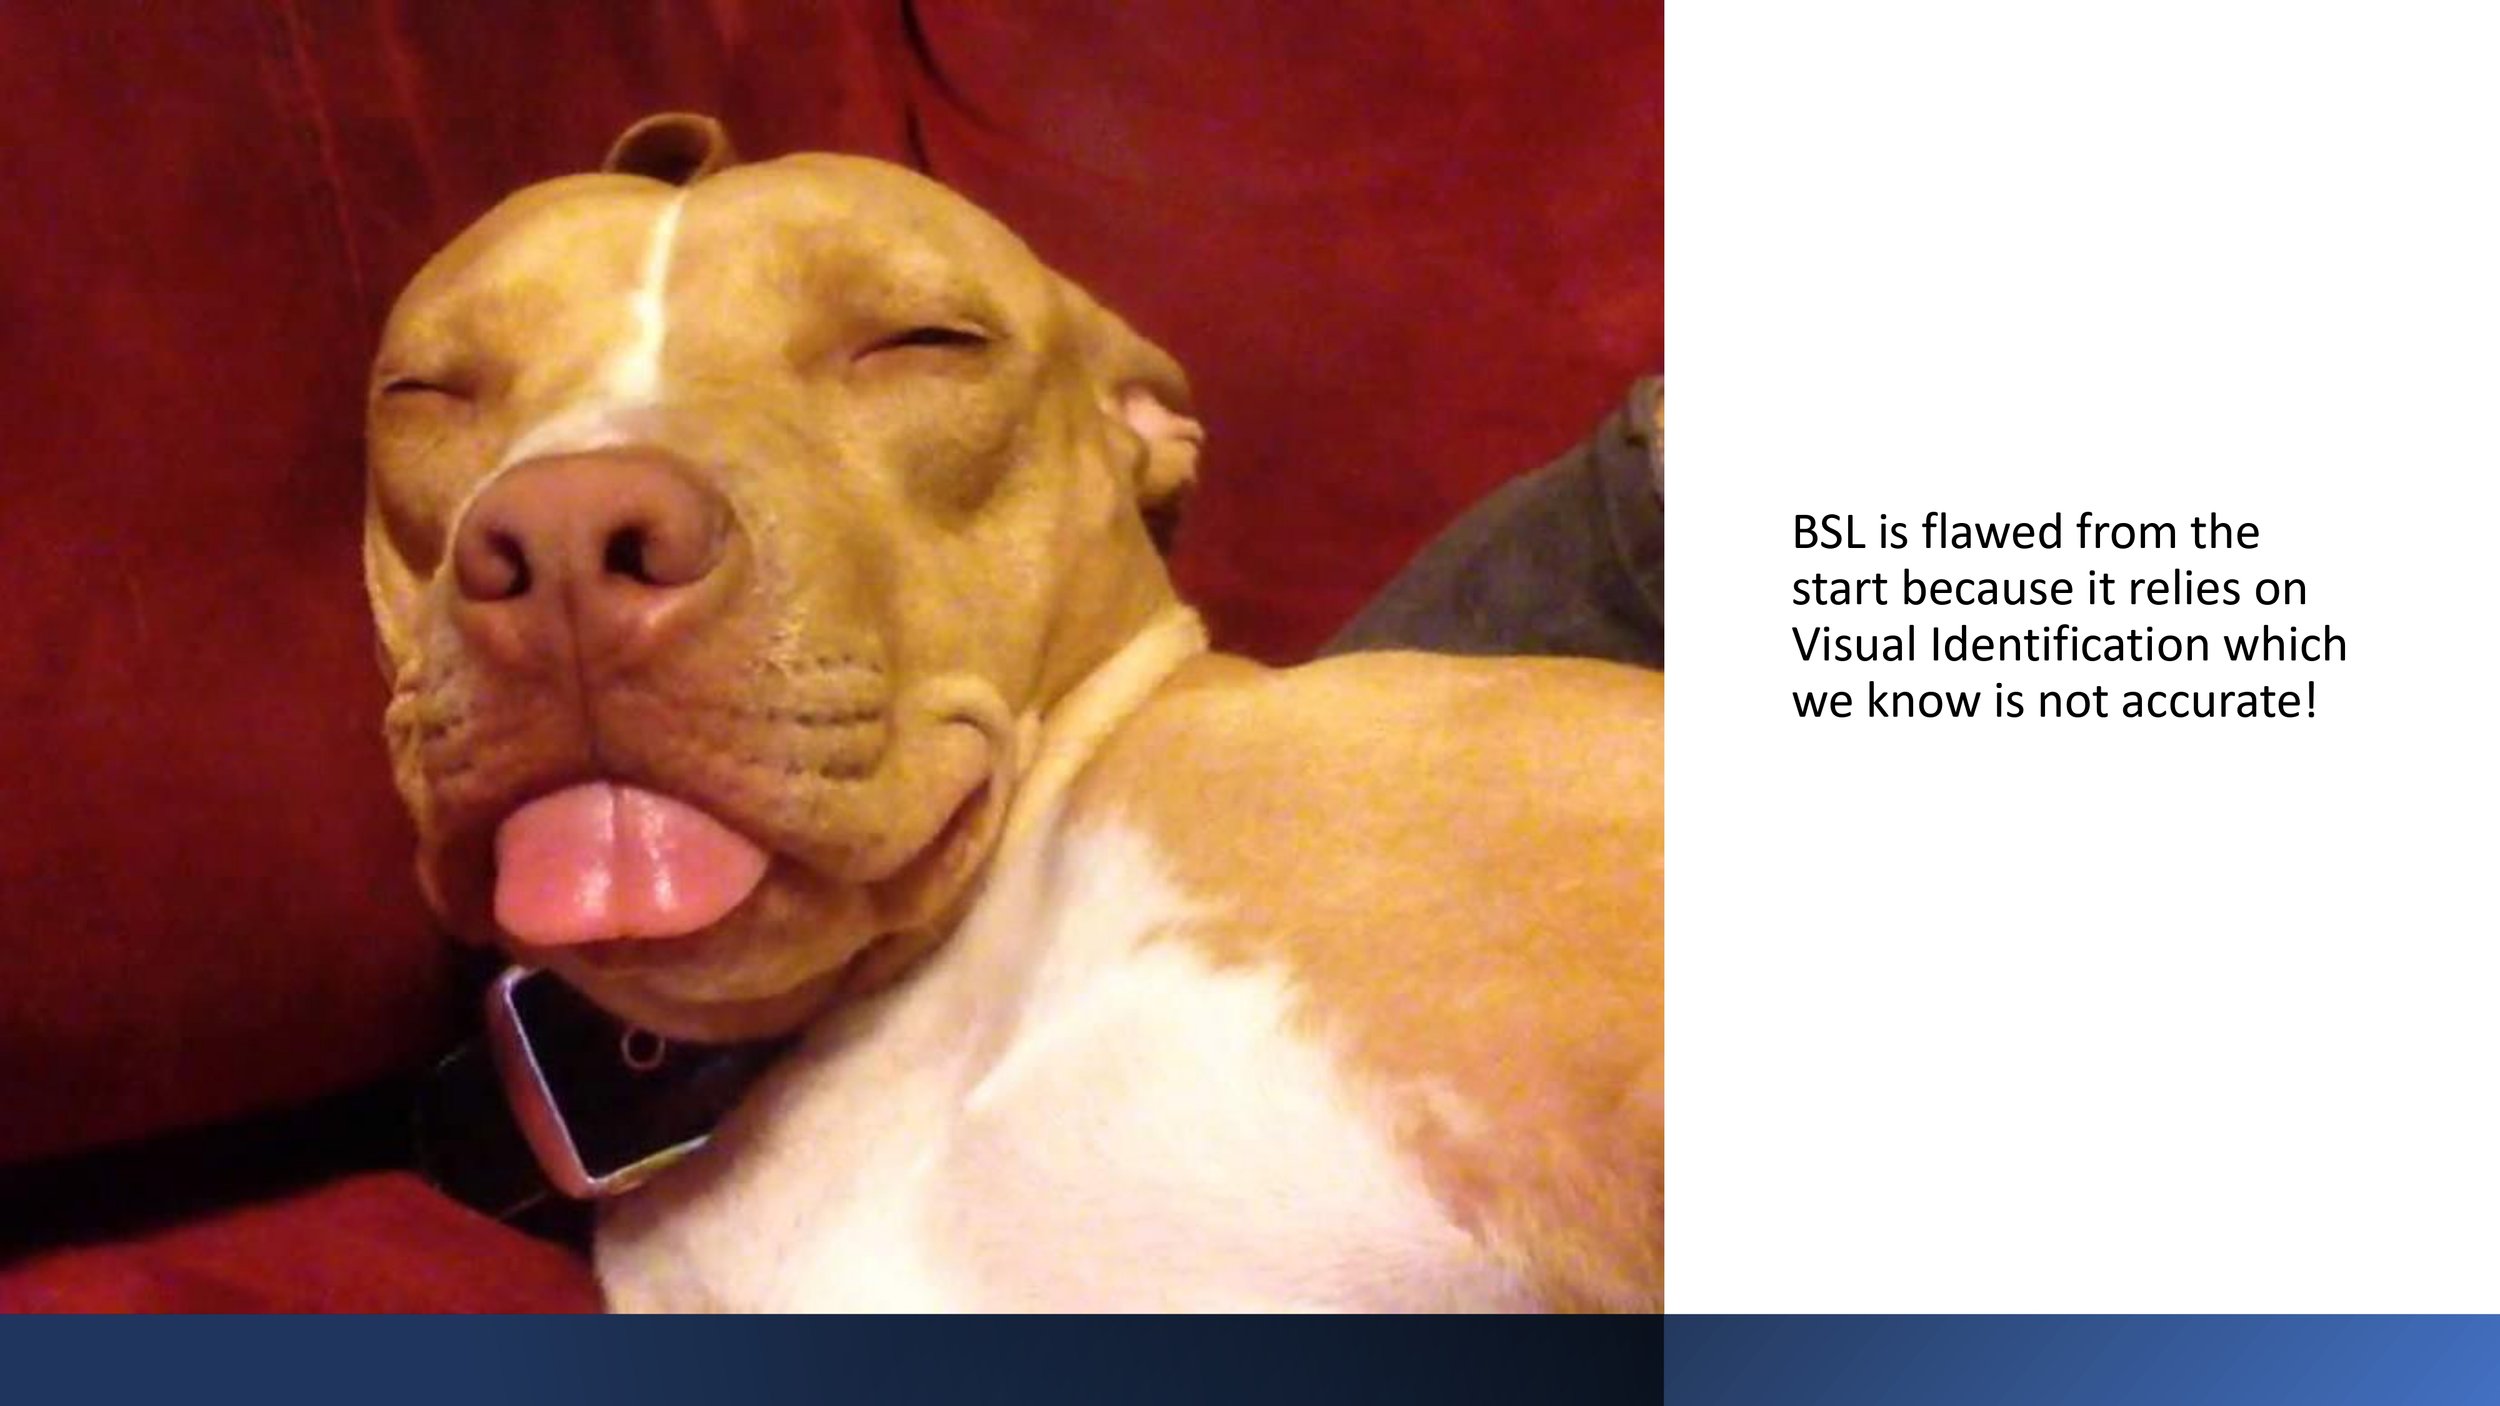 Pit+Bull+Presentation_pages-to-jpg-0017.jpg